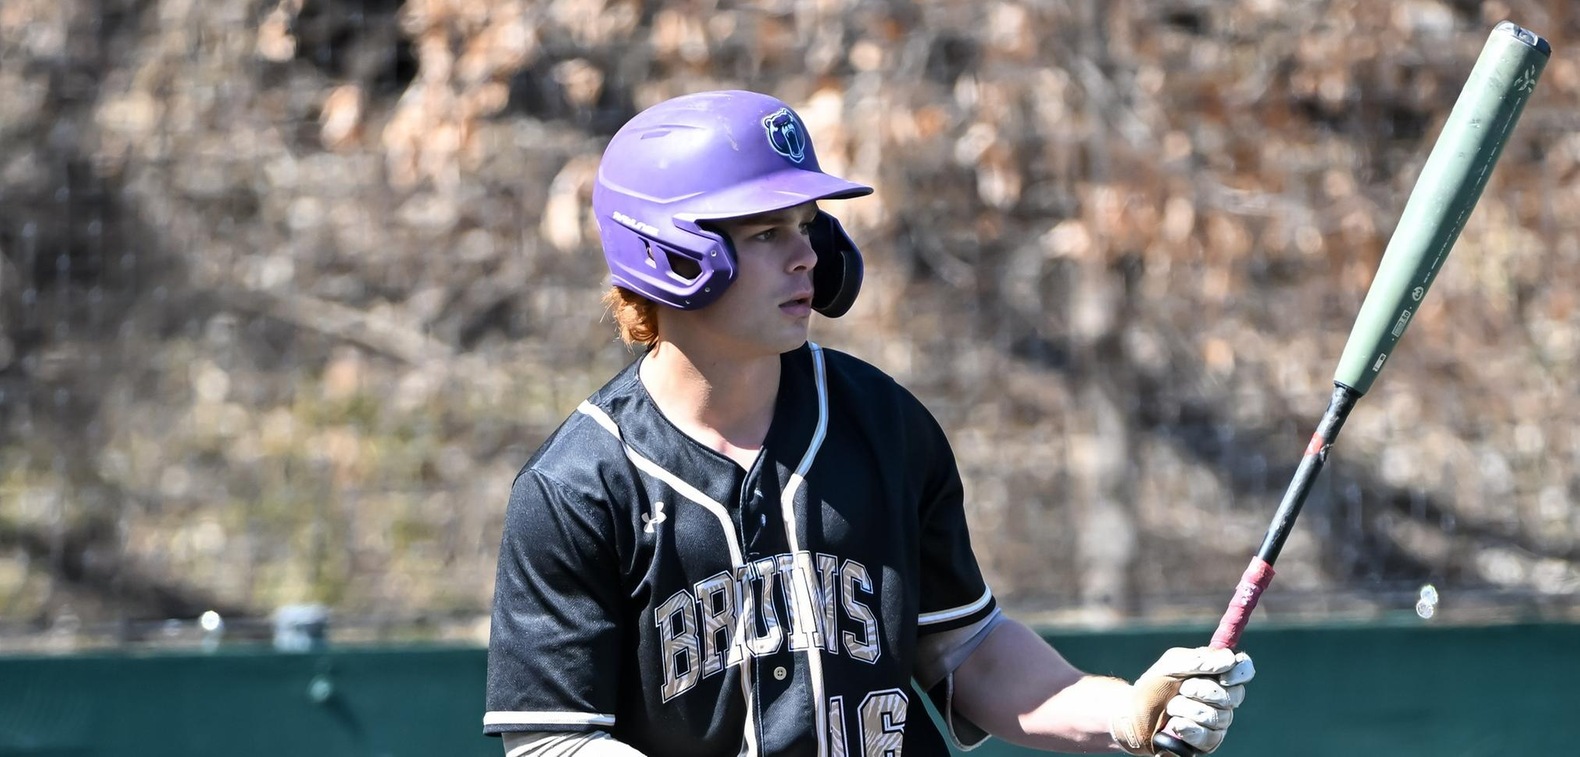 Big innings deal Bruins loss to open Spring Trip